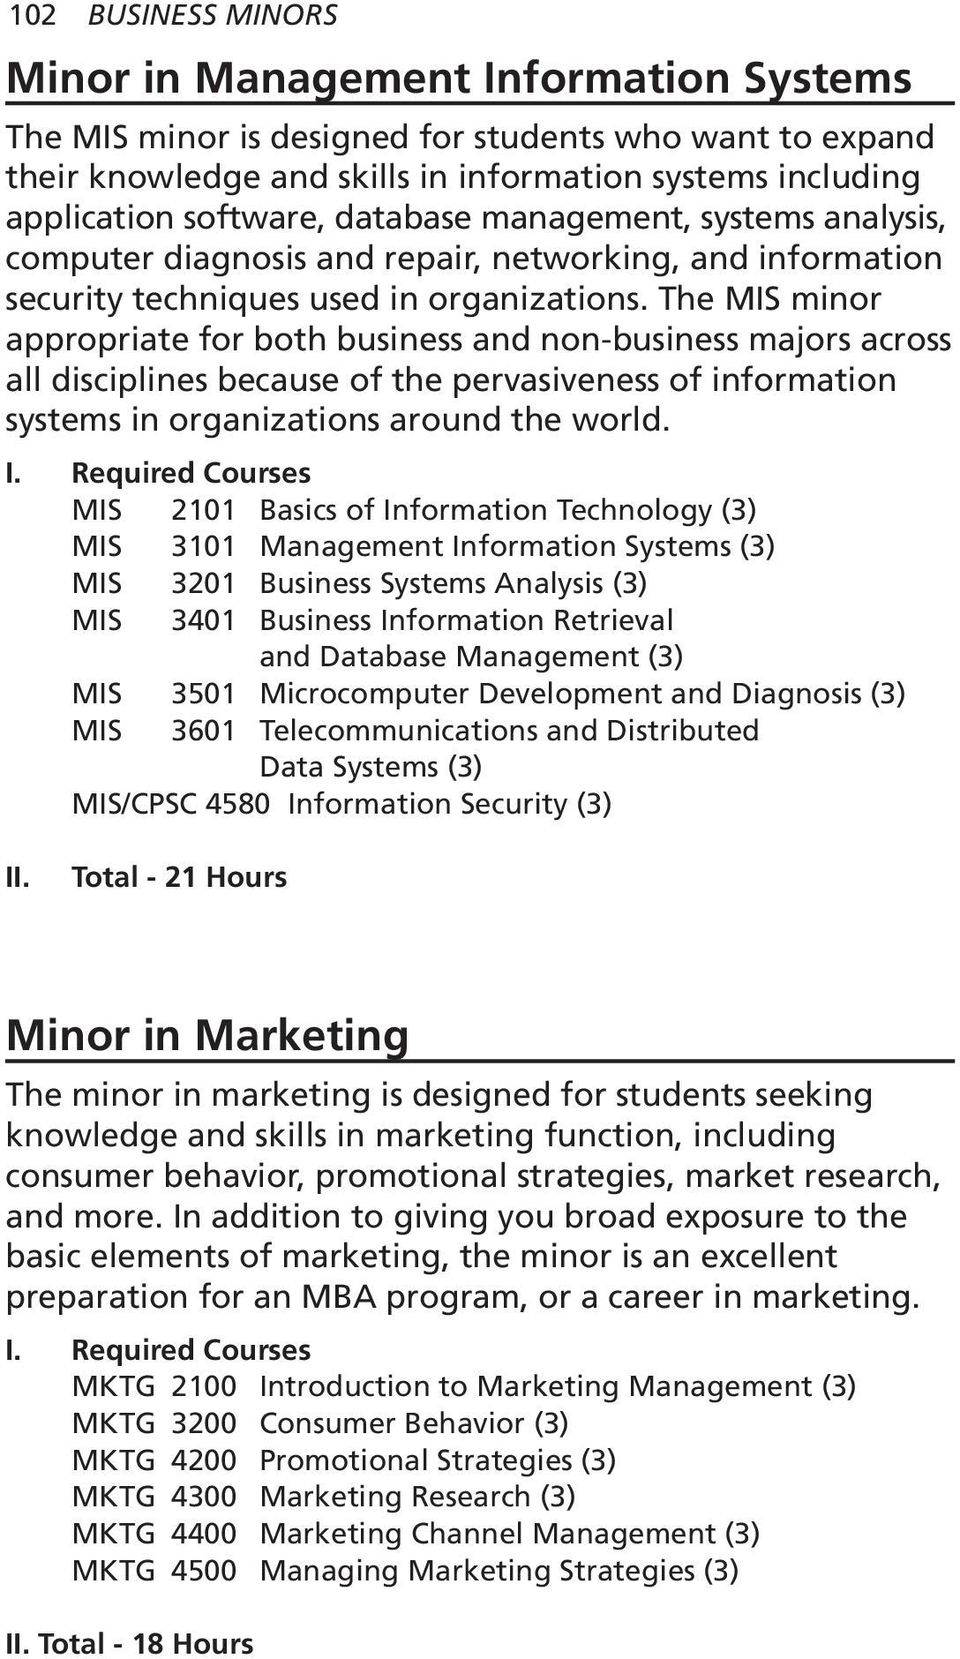 The MIS minor appropriate for both business and non-business majors across all disciplines because of the pervasiveness of information systems in organizations around the world.